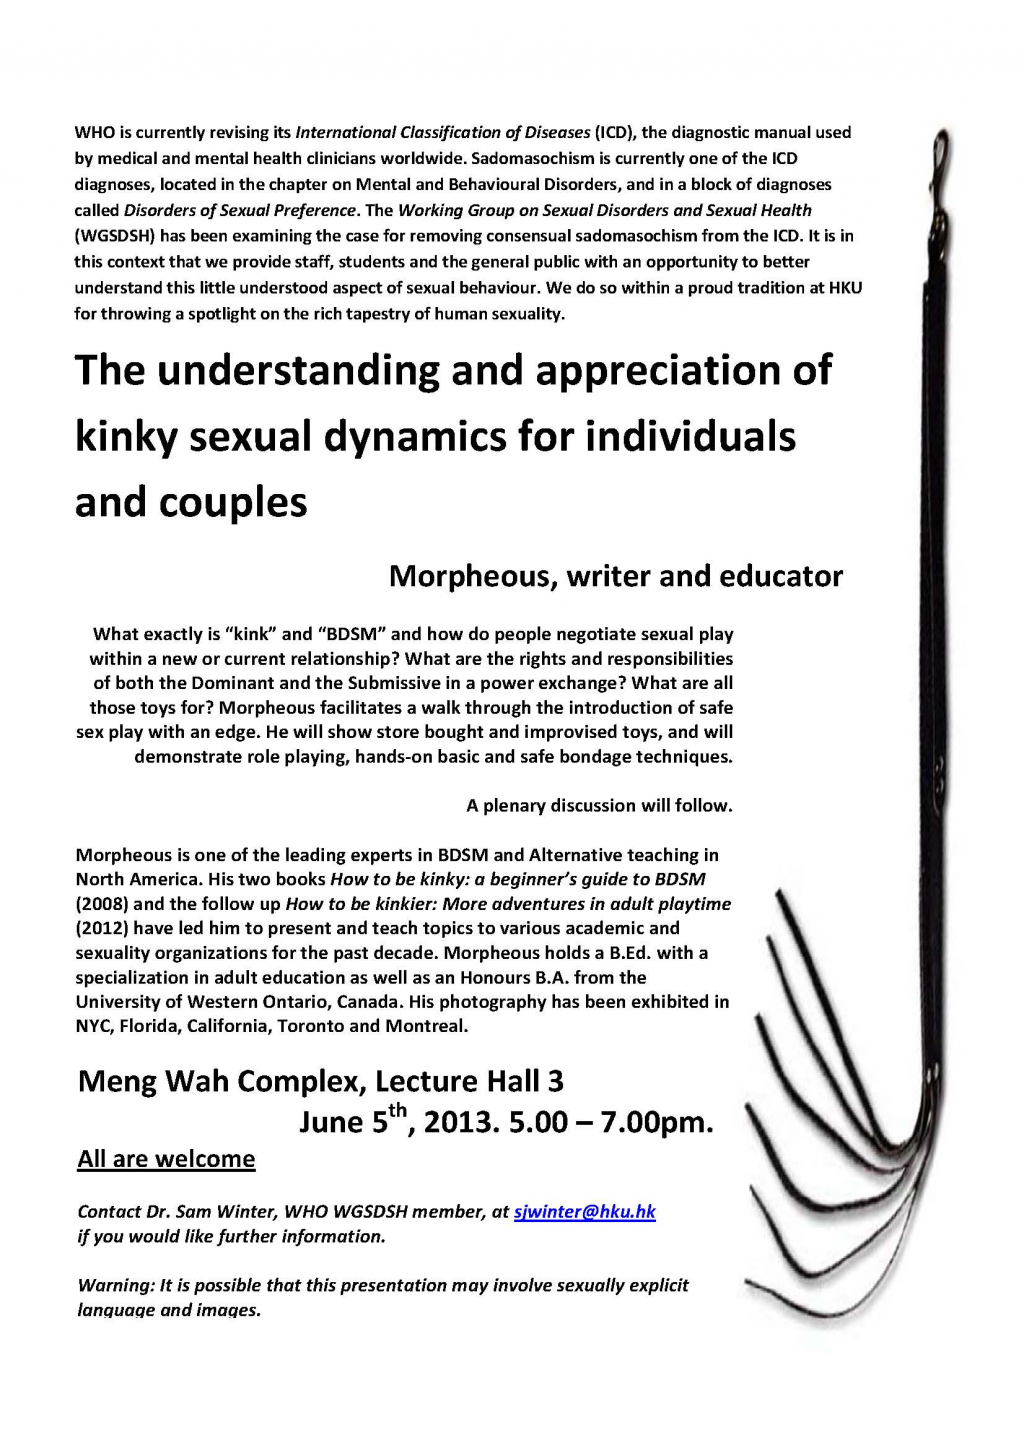 The understanding and appreciation of kinky sexual dynamics for individuals and couples